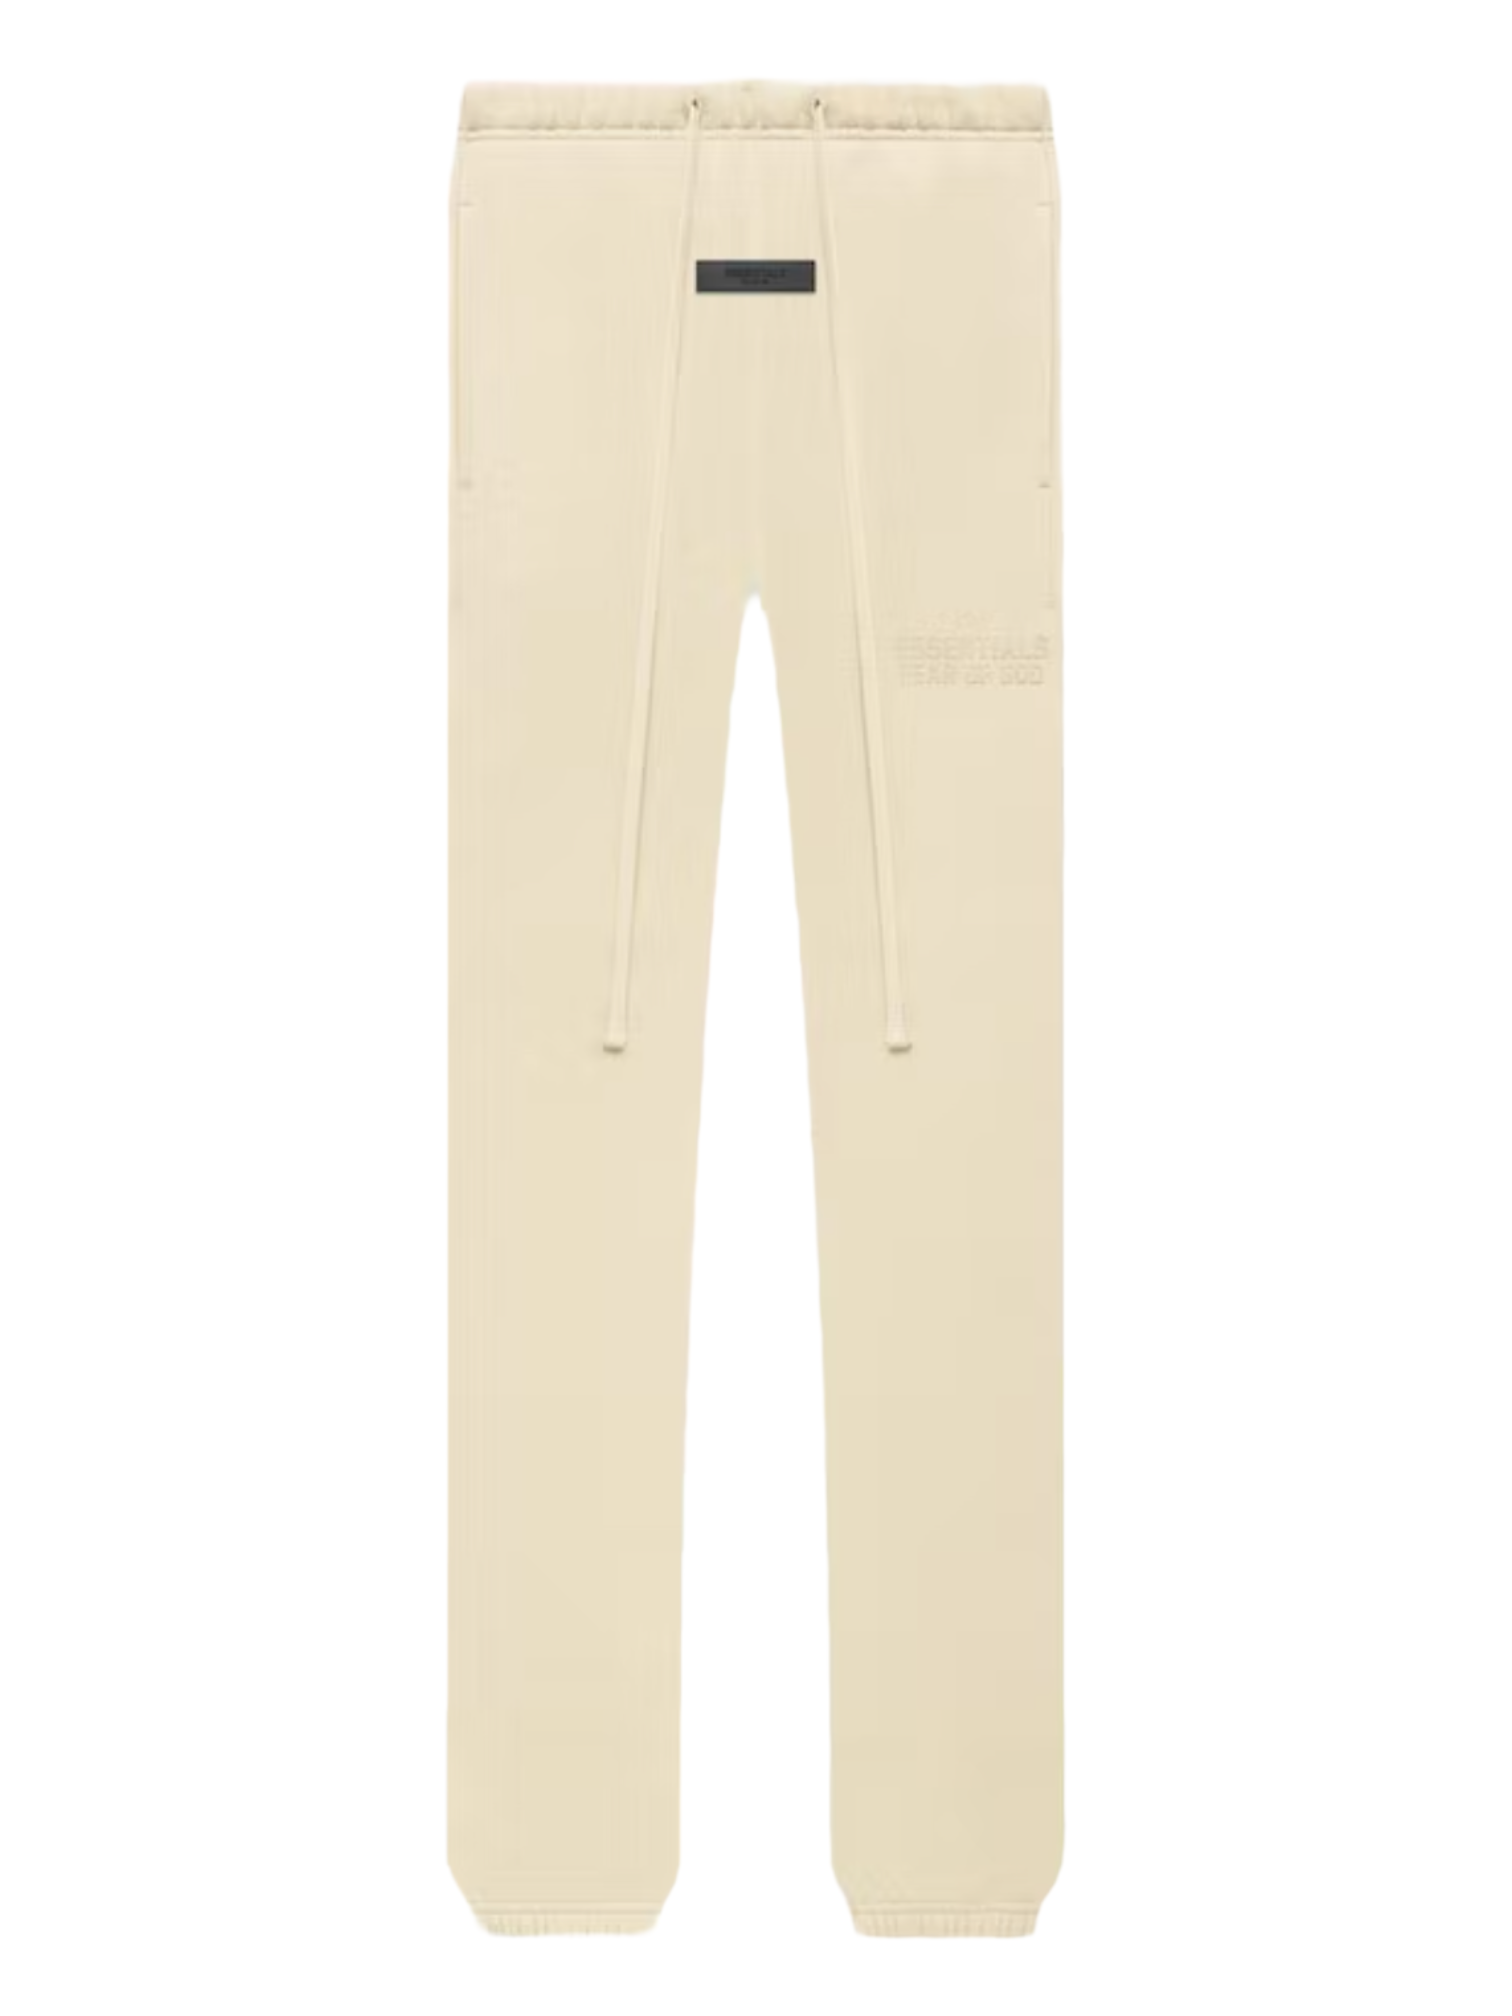 Essentials Fear of God Eggshell Fleece Sweatpants — Genuine Design Luxury Consignment for Men. New & Pre-Owned Clothing, Shoes, & Accessories. Calgary, Canada